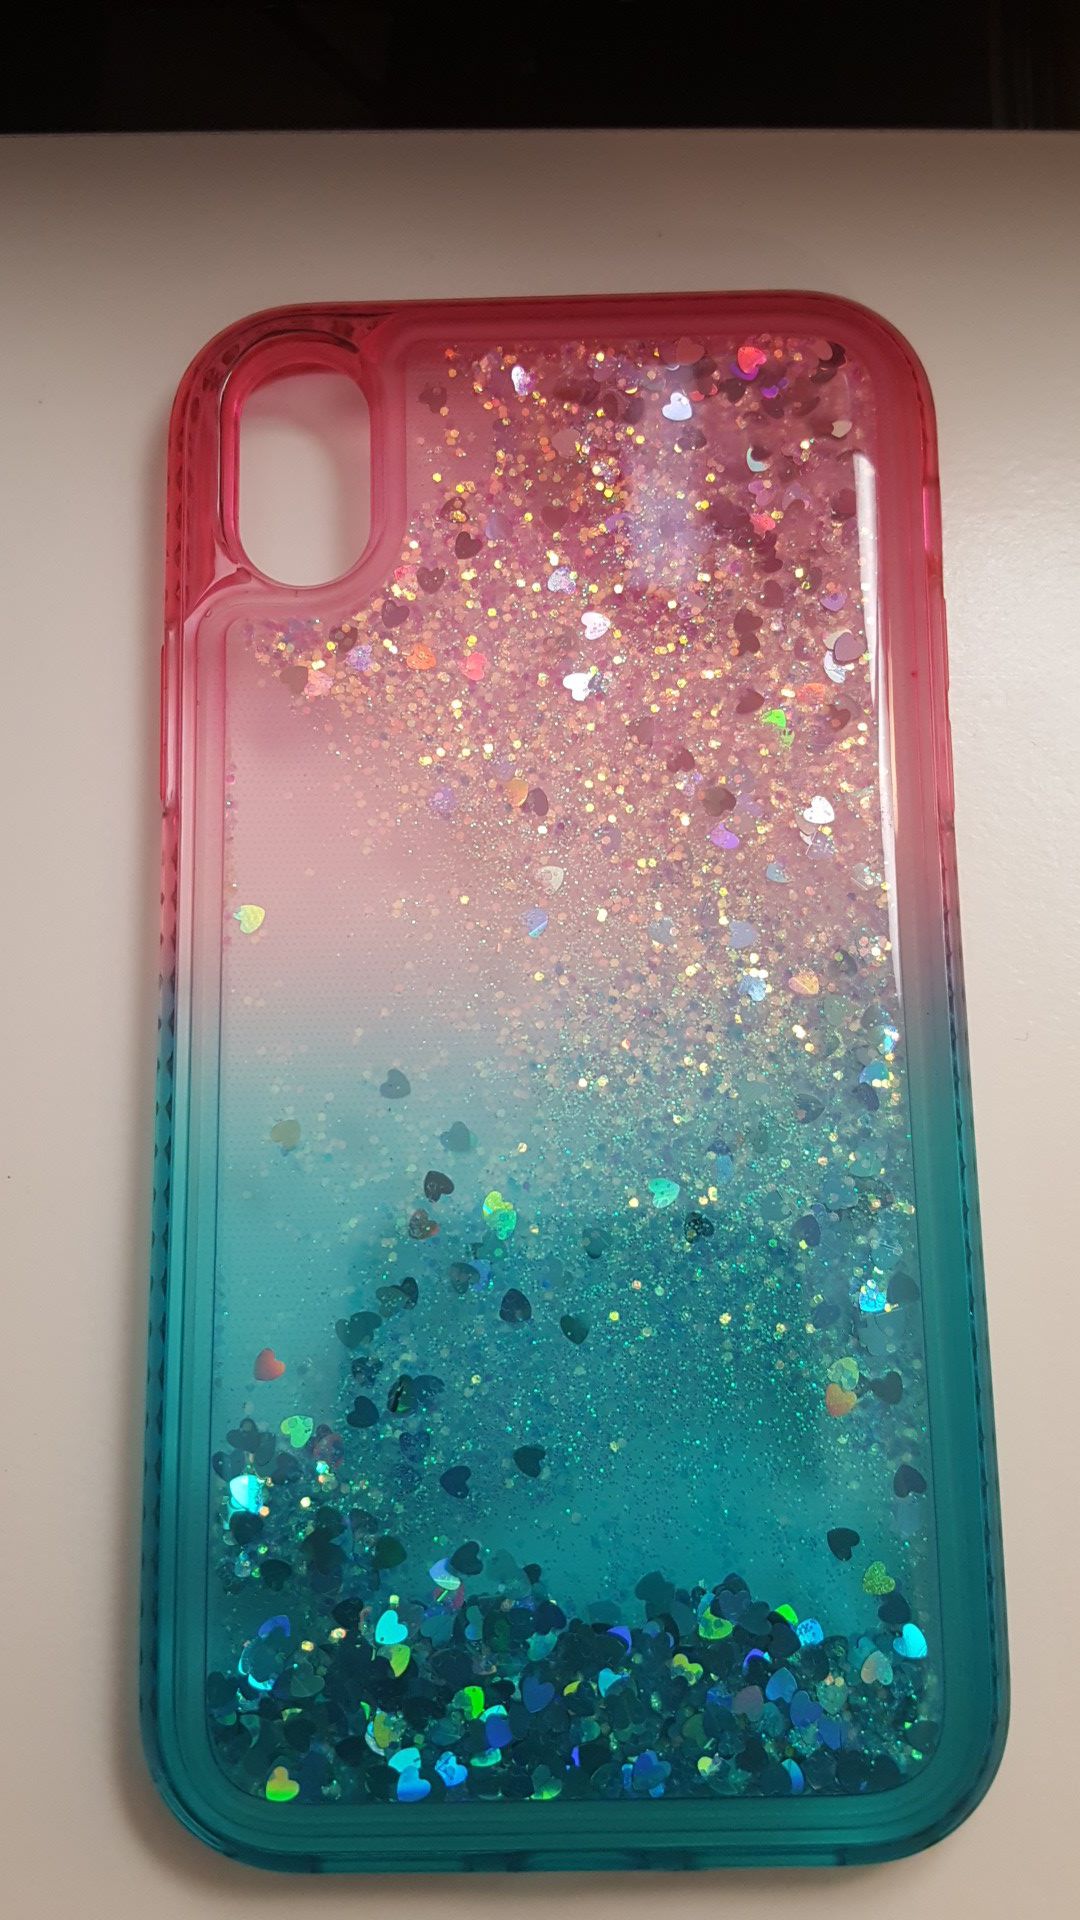 case waterfall for iphone XR 6.1" clear-pink-blue glitter new 11firm now ship out of the town